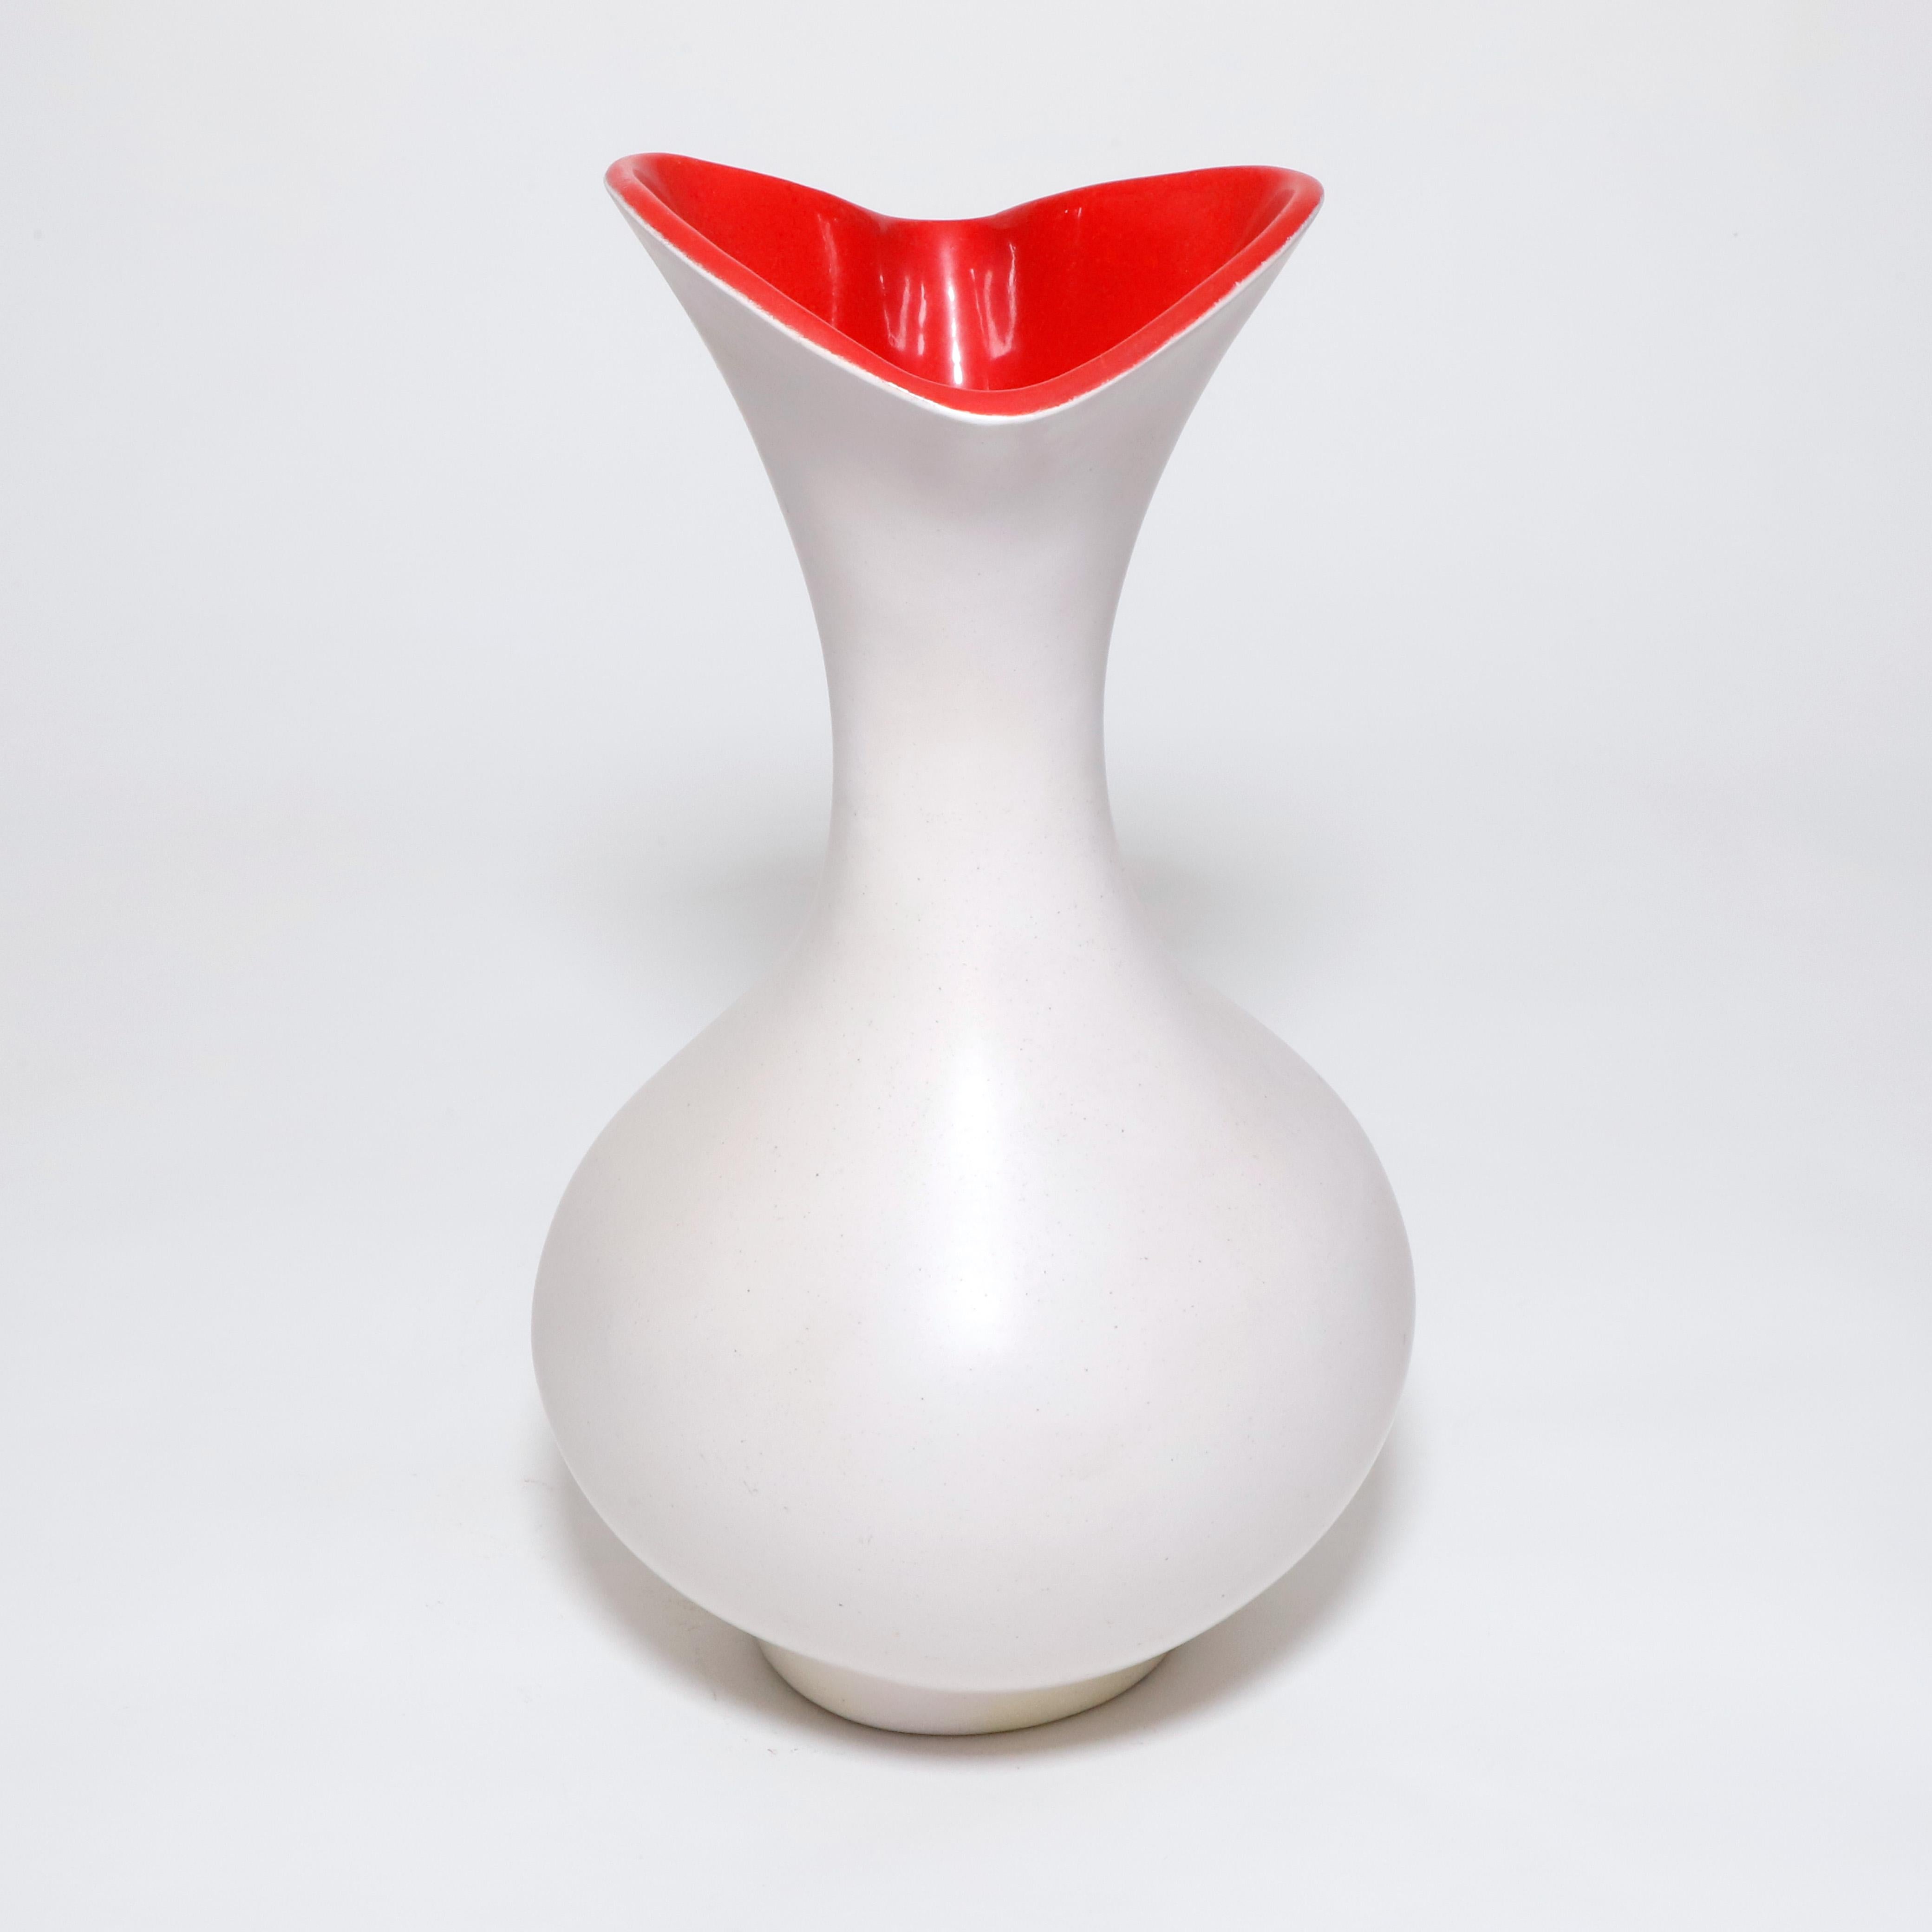 1956 894 Model Pol Chambost Ceramic Pitcher with Red Interior Glaze, Signed In Good Condition For Sale In New York, NY